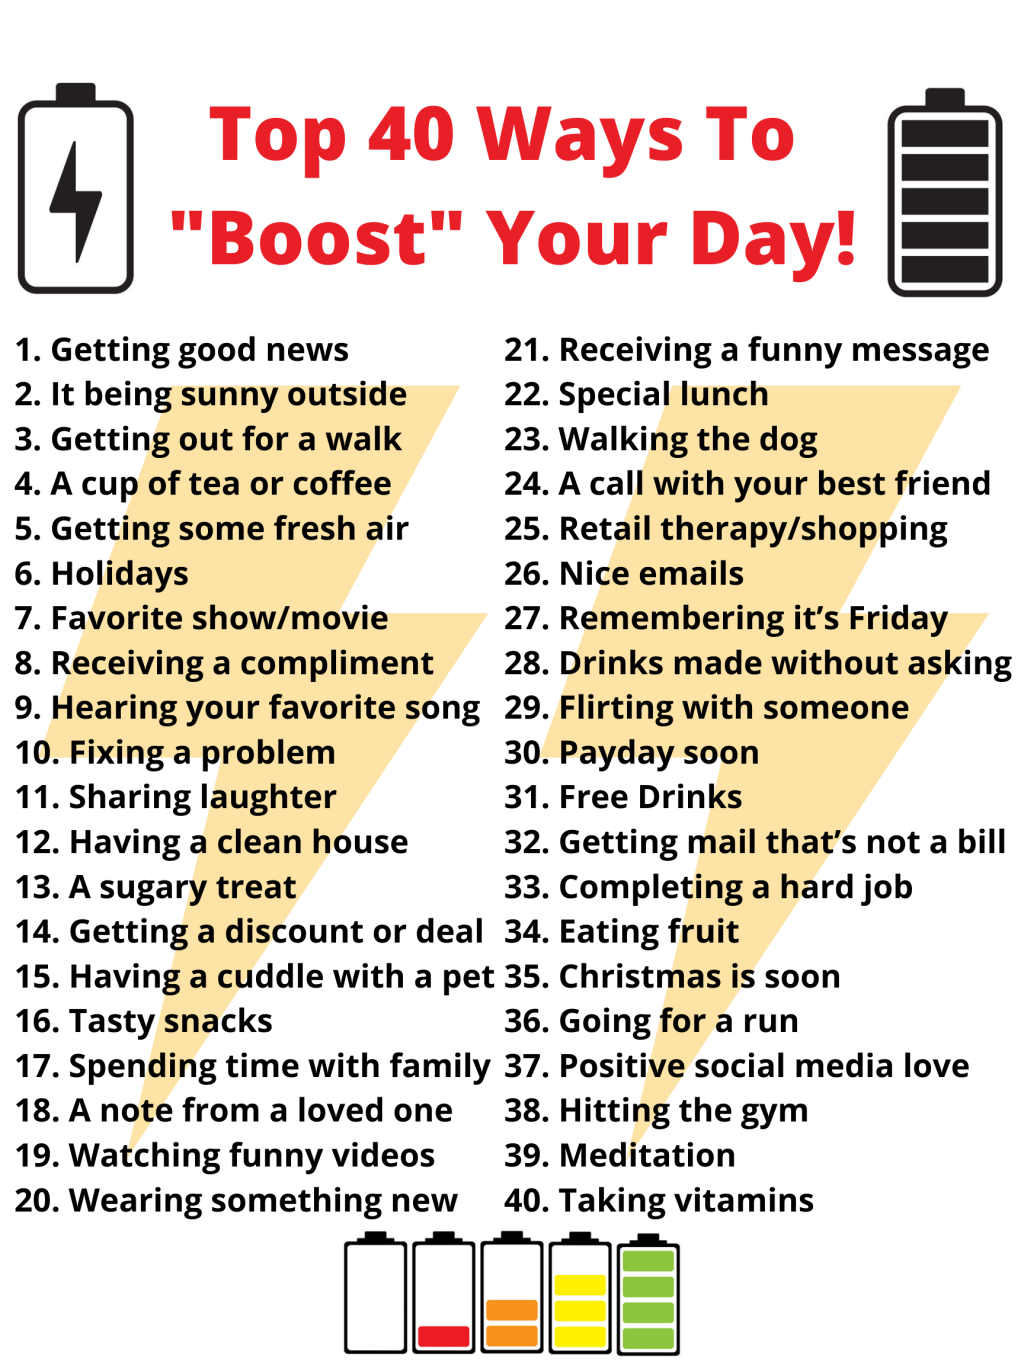 Top 40 Ways To "Boost" Your Day!